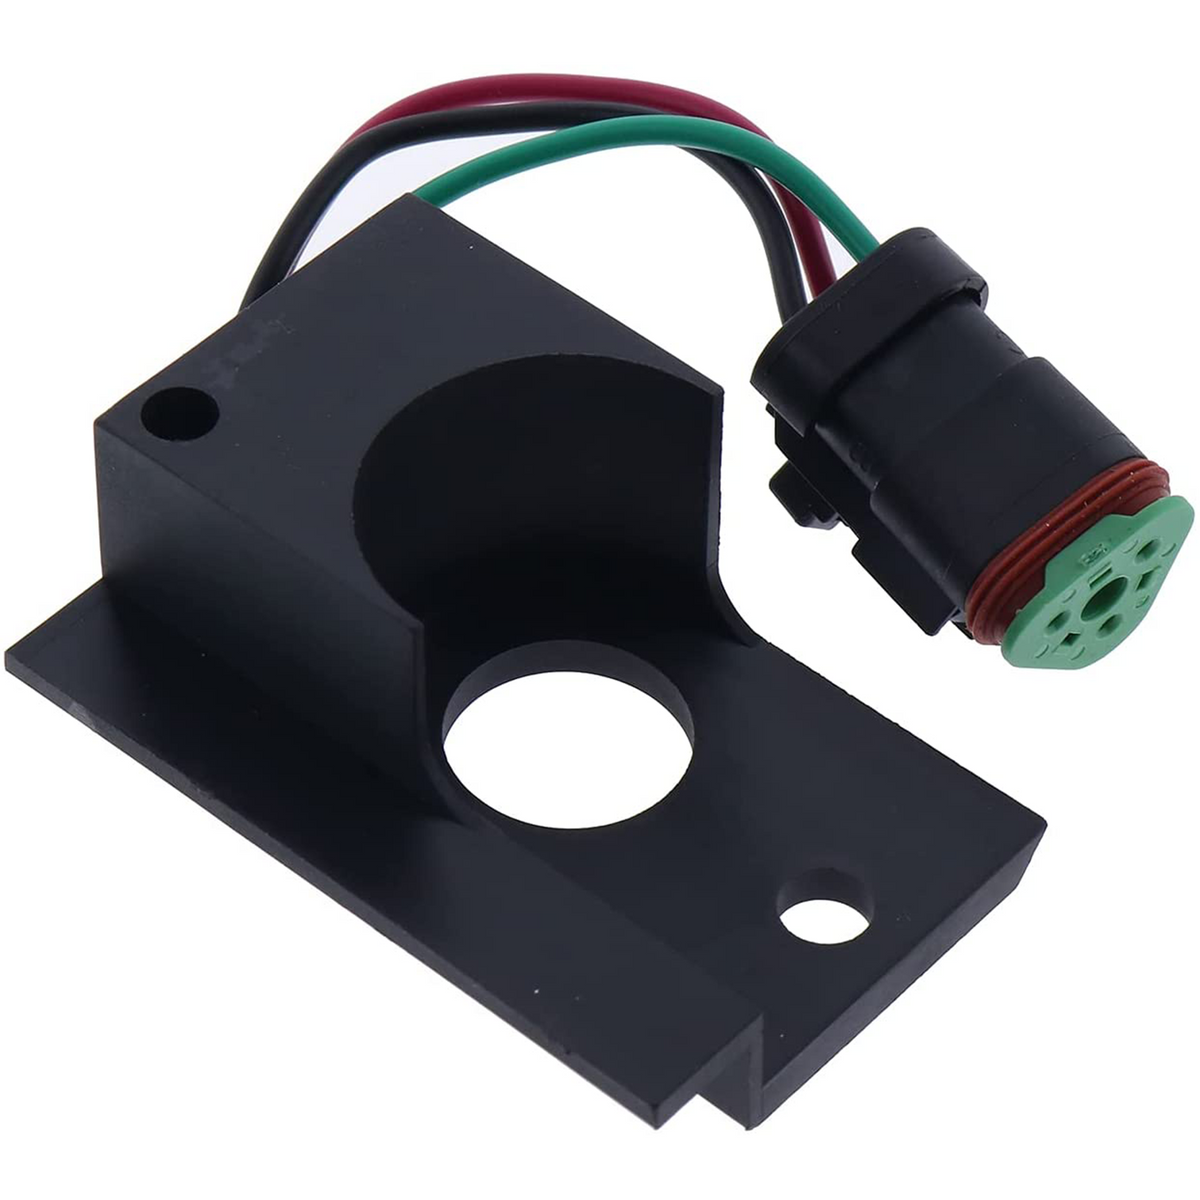 Seat Bar Sensor Switch 7105252 Compatible with Bobcat Skid Steer S70 450 453 463 553 653 751 753 763 773 853 863 864 873 953 963 F&C Series